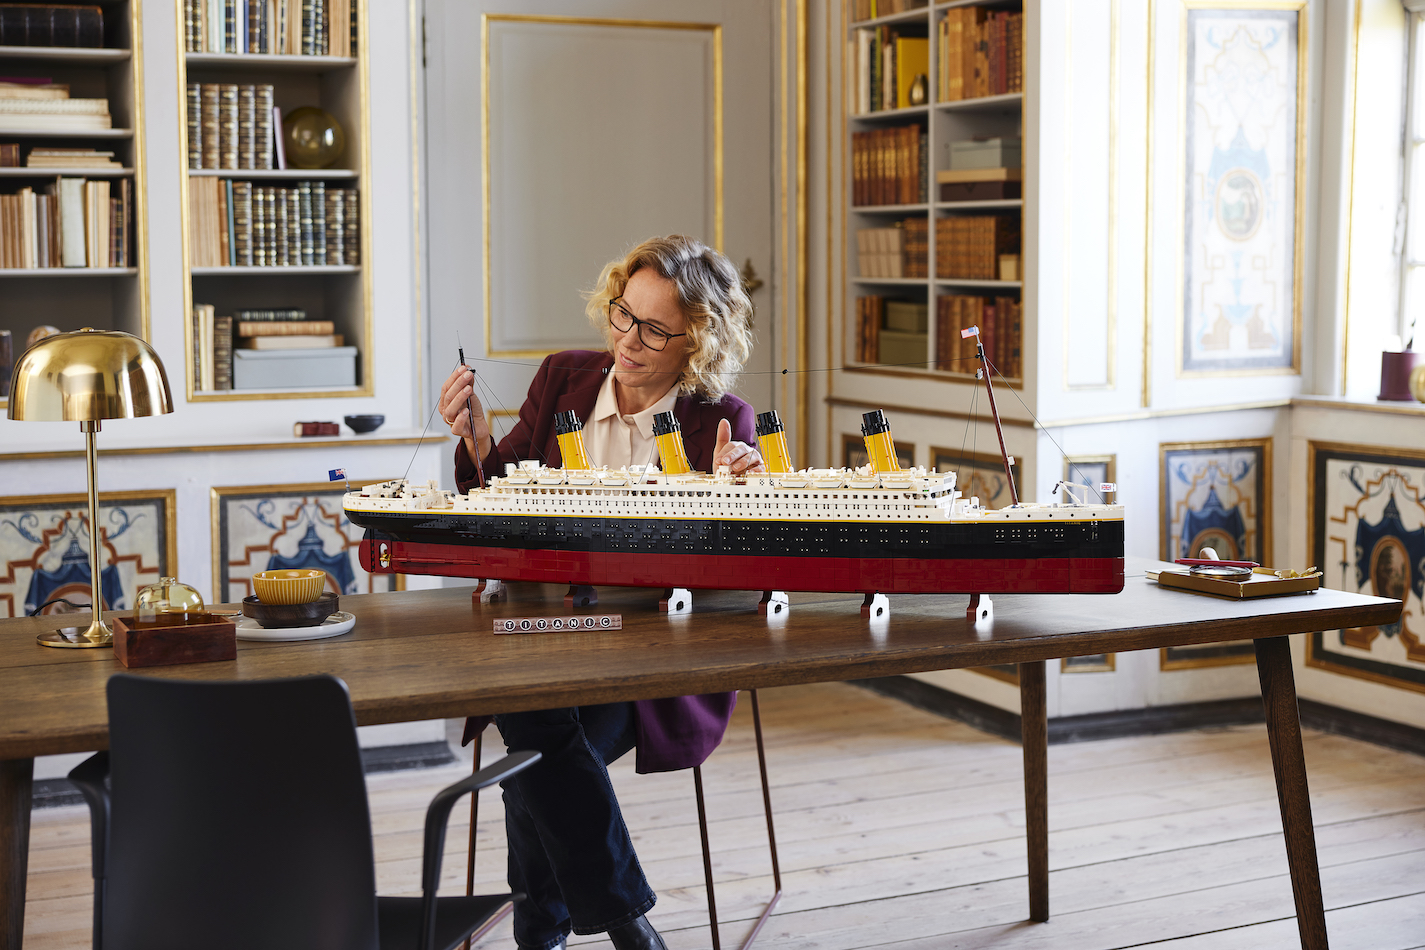 LEGO unveils the grandest ship in history - RMS Titanic